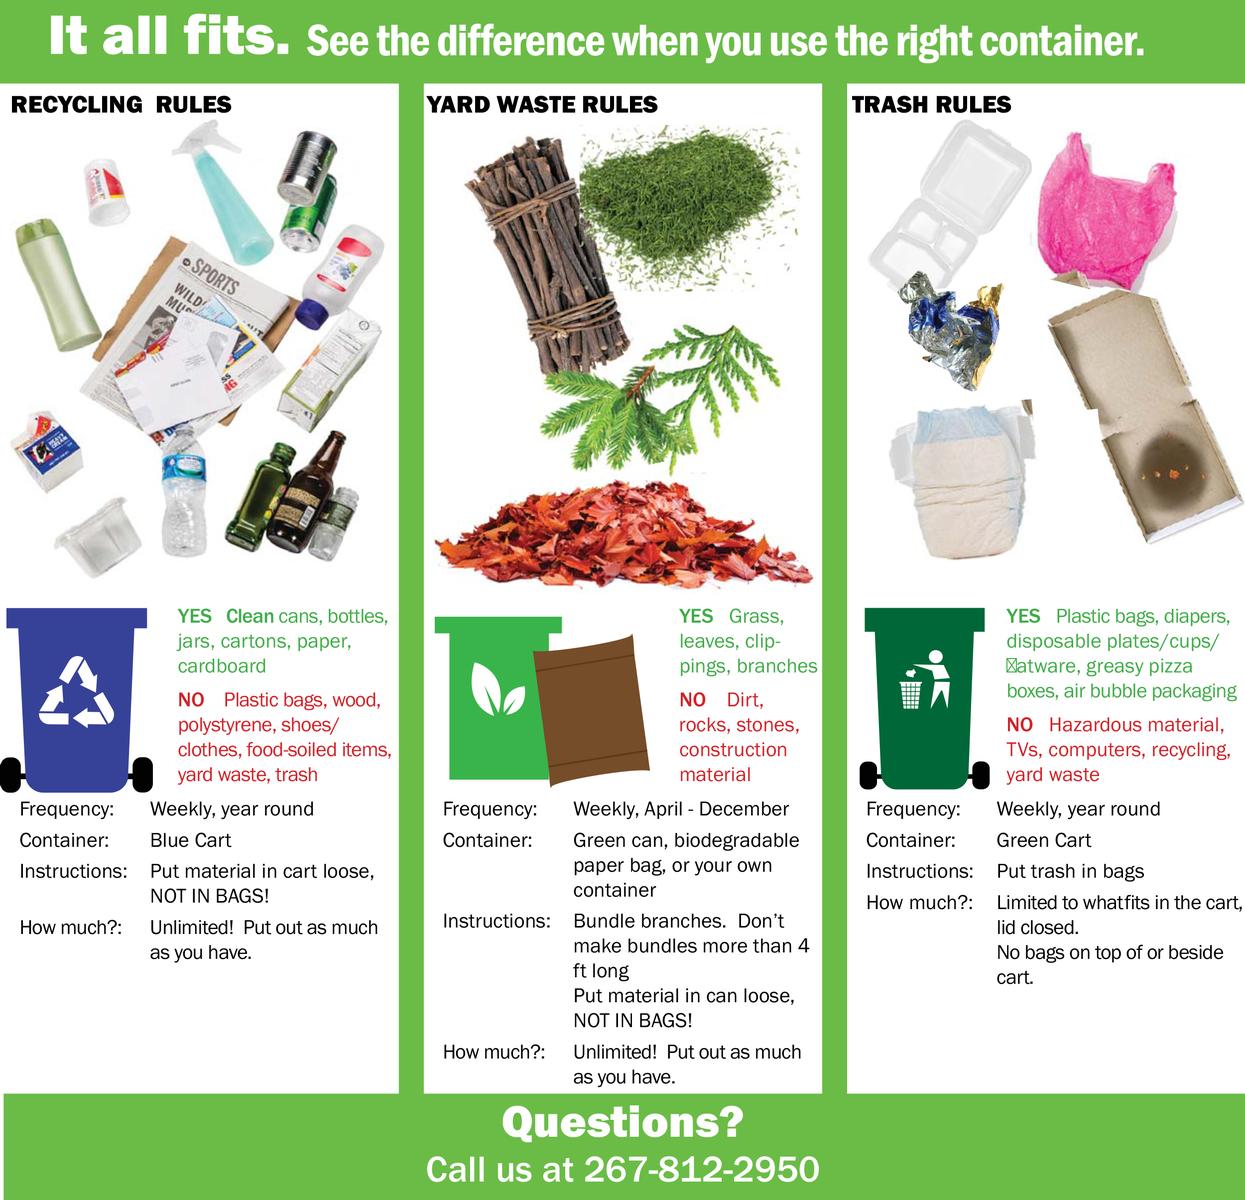 Residential Waste & Recycling Guidelines